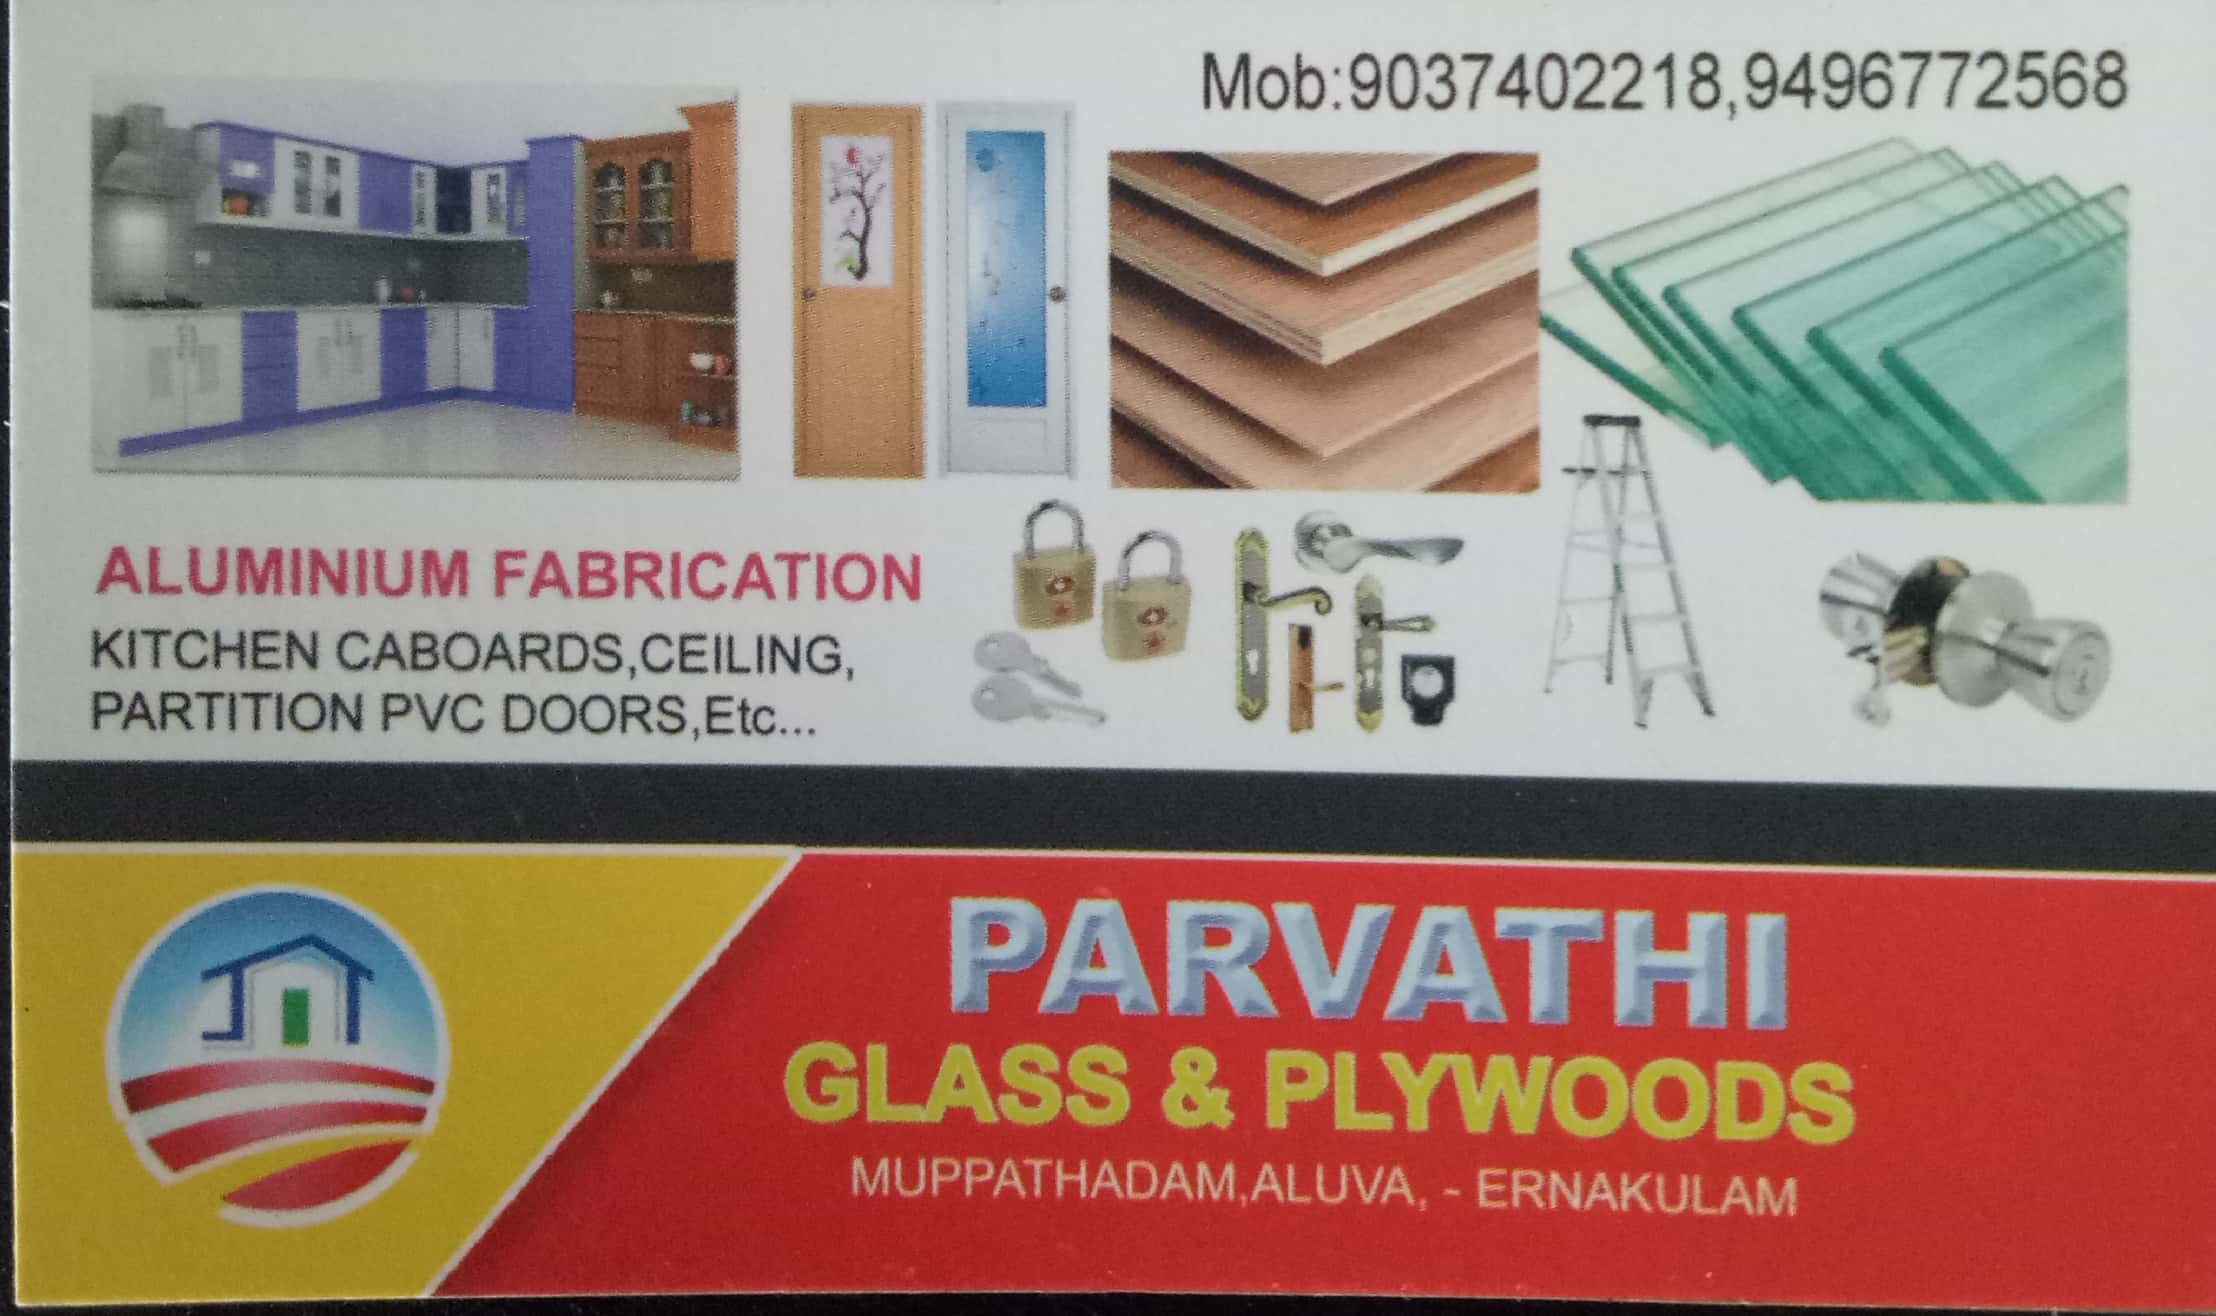 PARVATHI GLASS & PLYWOODS, GLASS & PLYWOOD,  service in Aluva, Ernakulam